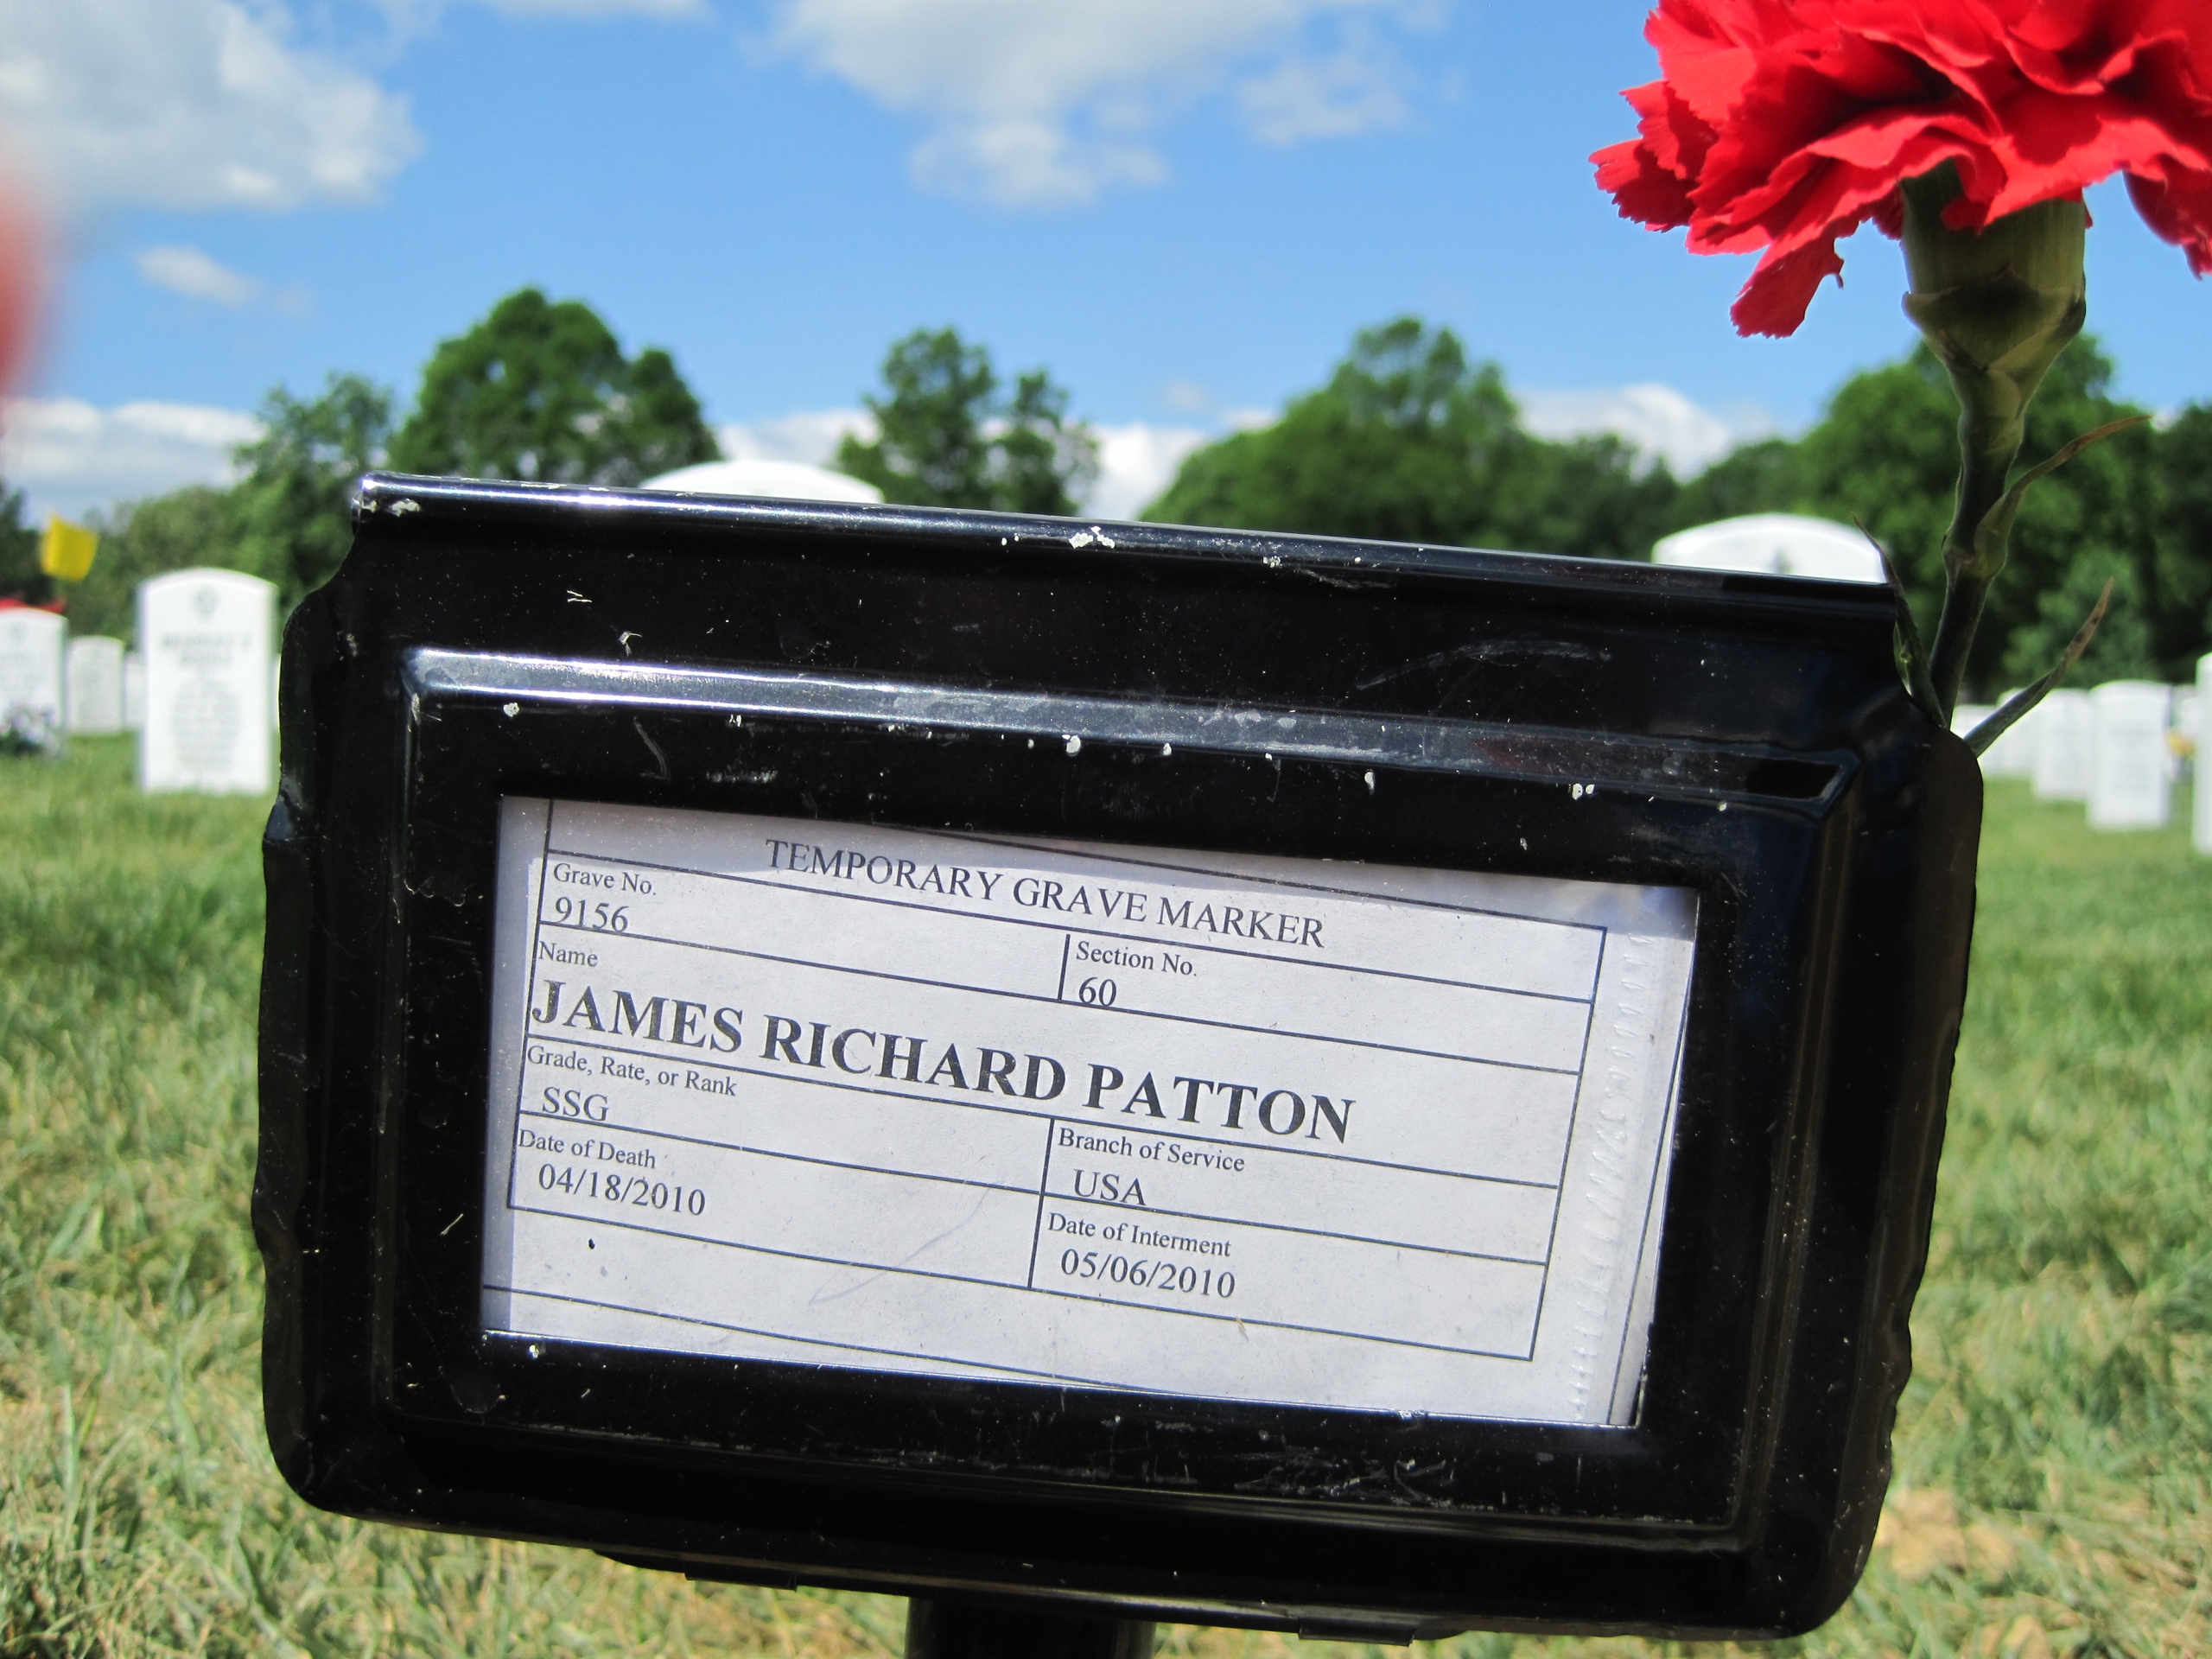 jrpatton-gravesite-photo-by-eileen-horan-may-2010-002